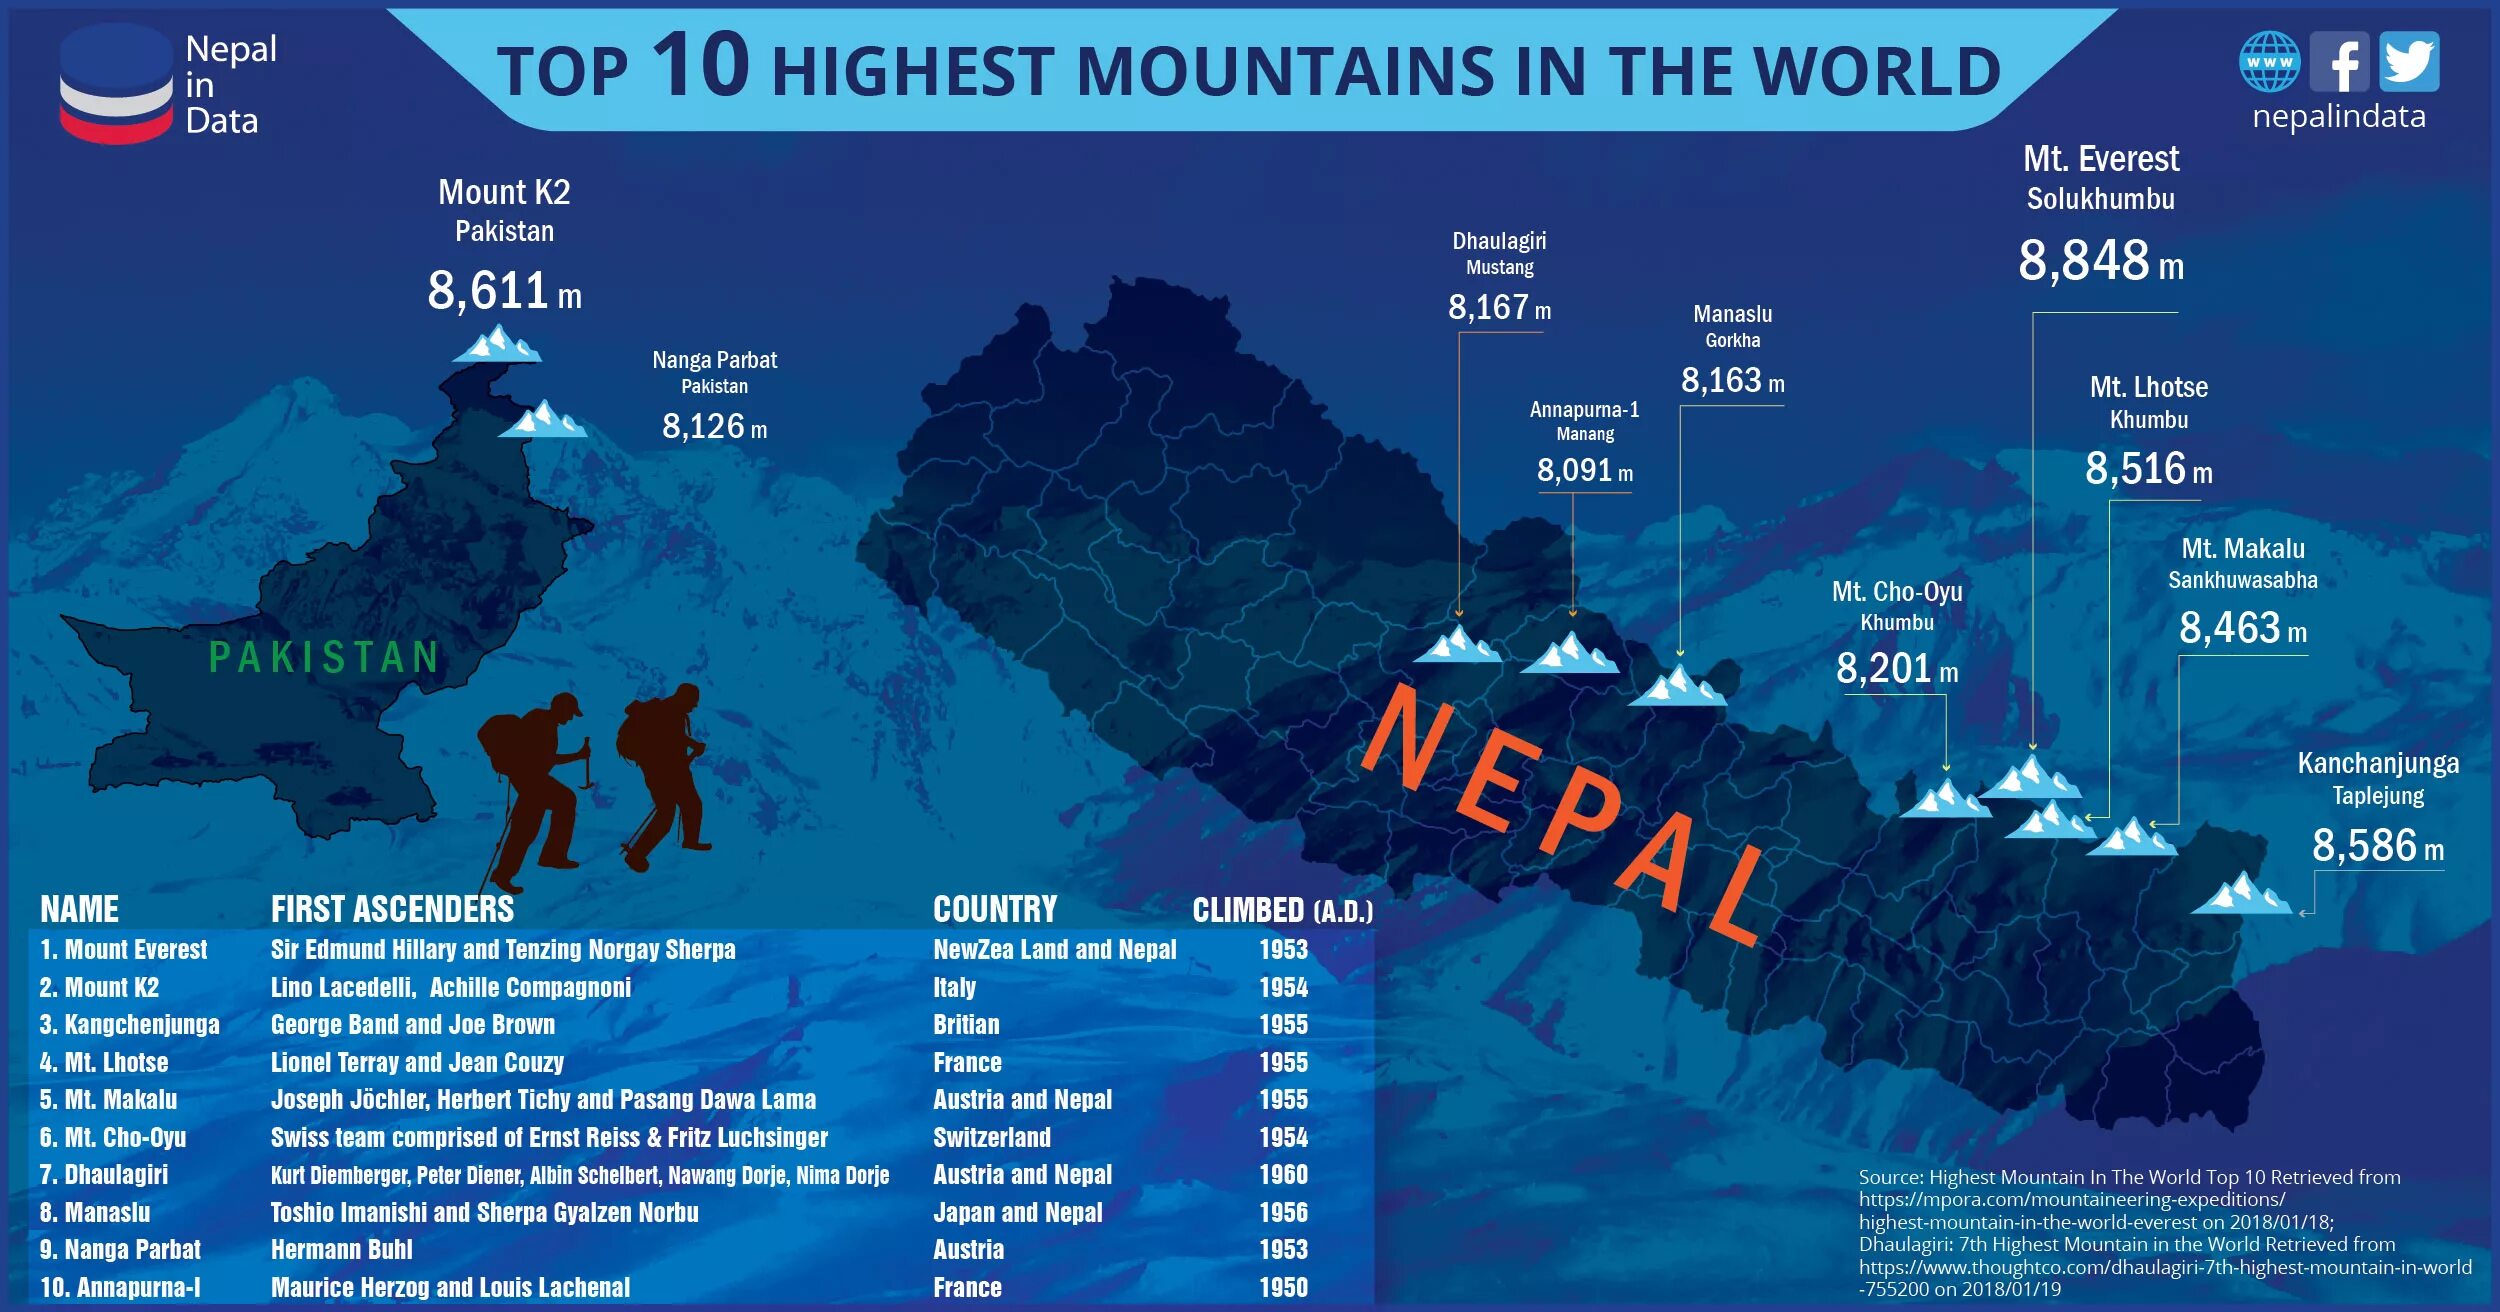 Mount everest is high in the world. The biggest Mountain in the World. The Highest Mountain in the World is Mount Everest. Top 10 Highest Mountains. Mount Everest is High Mountain in the World ответы.